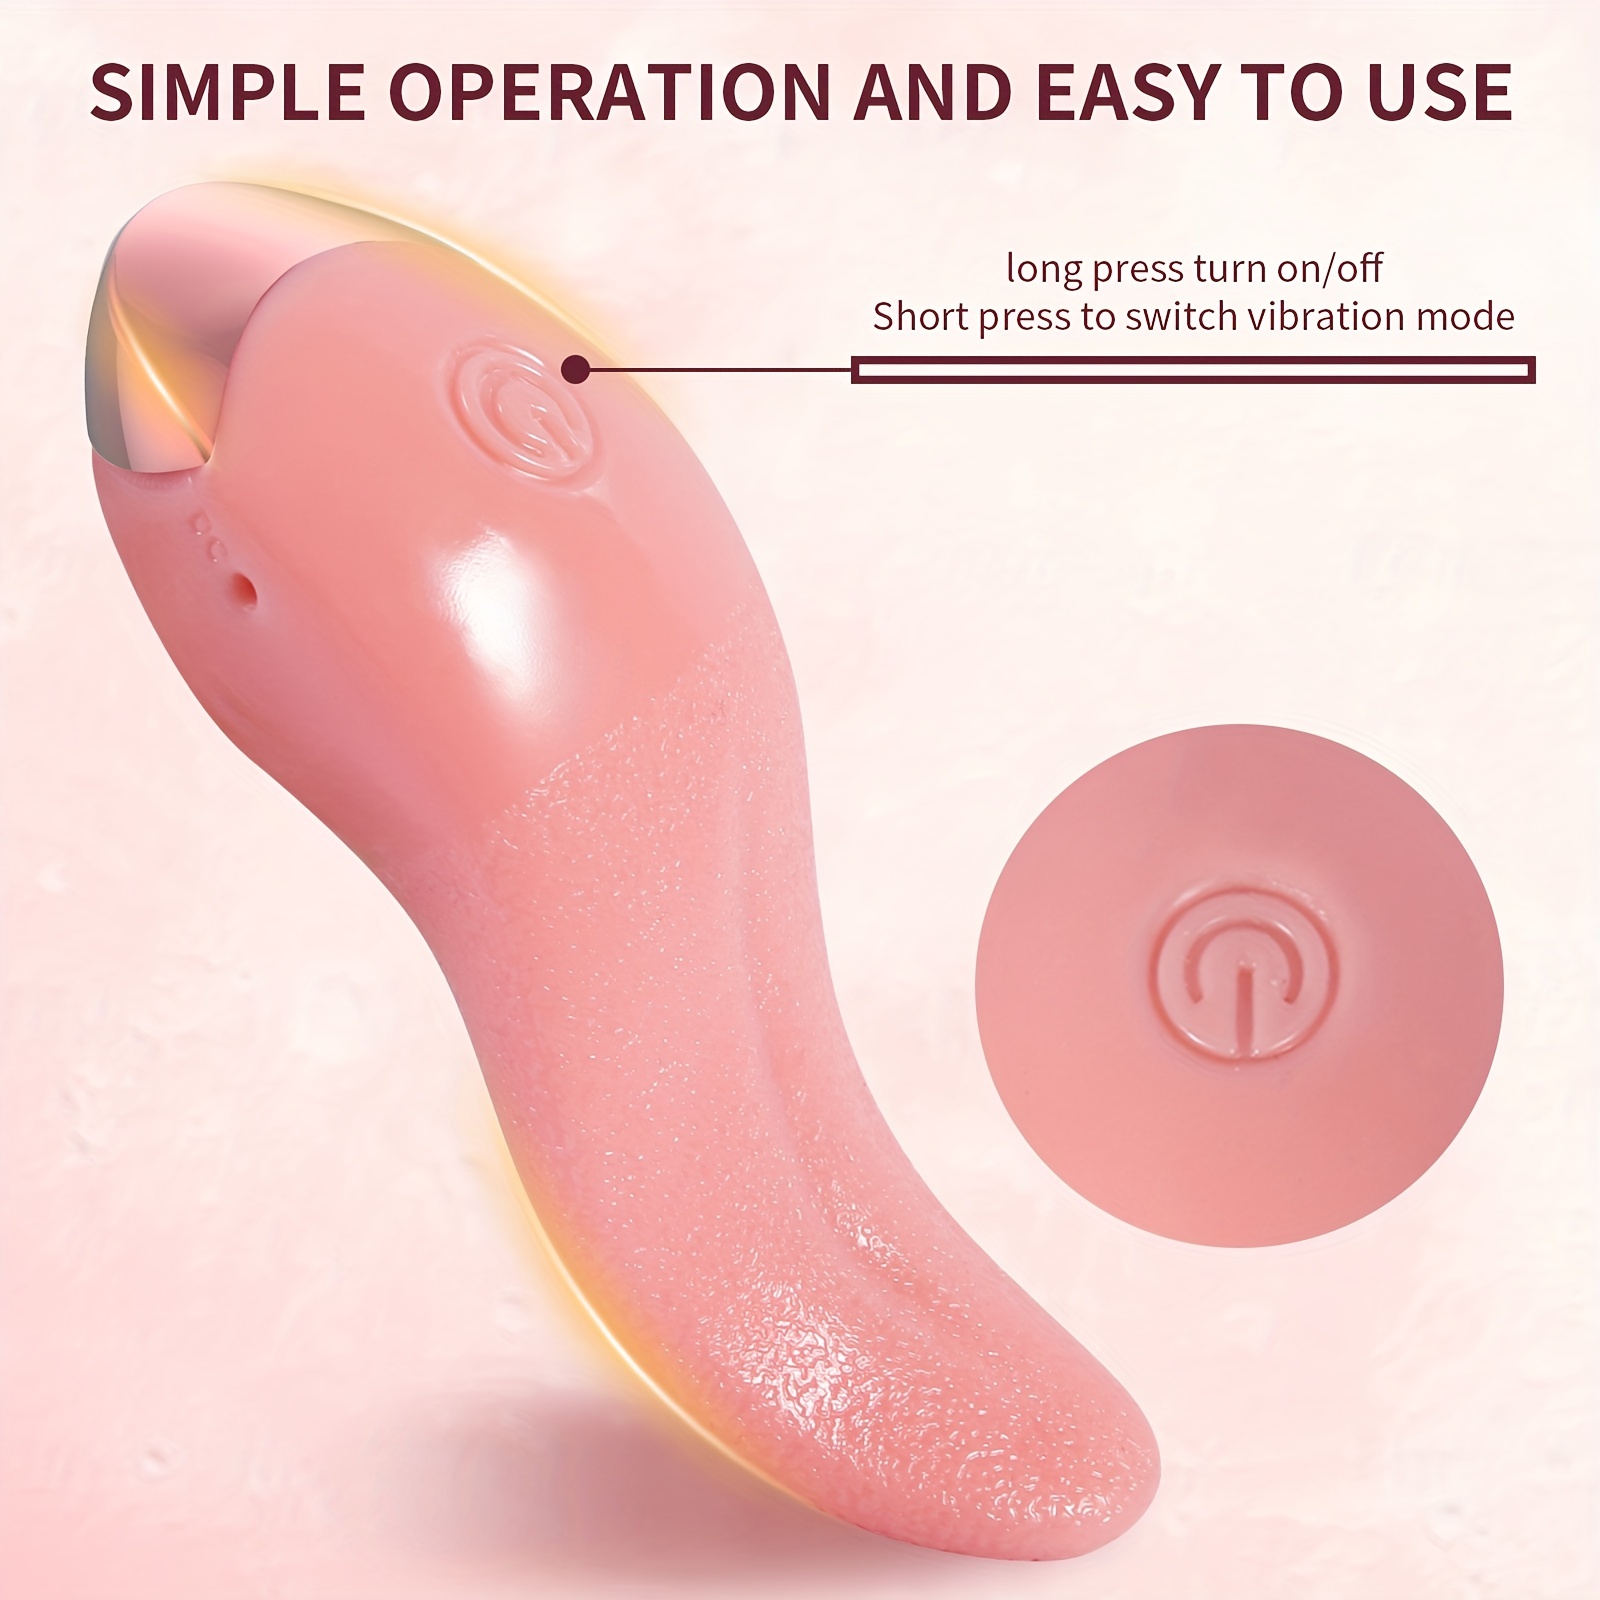 Fully Automatic Simulated Tongue Vibrator For Women, Adult Sex Toys photo photo